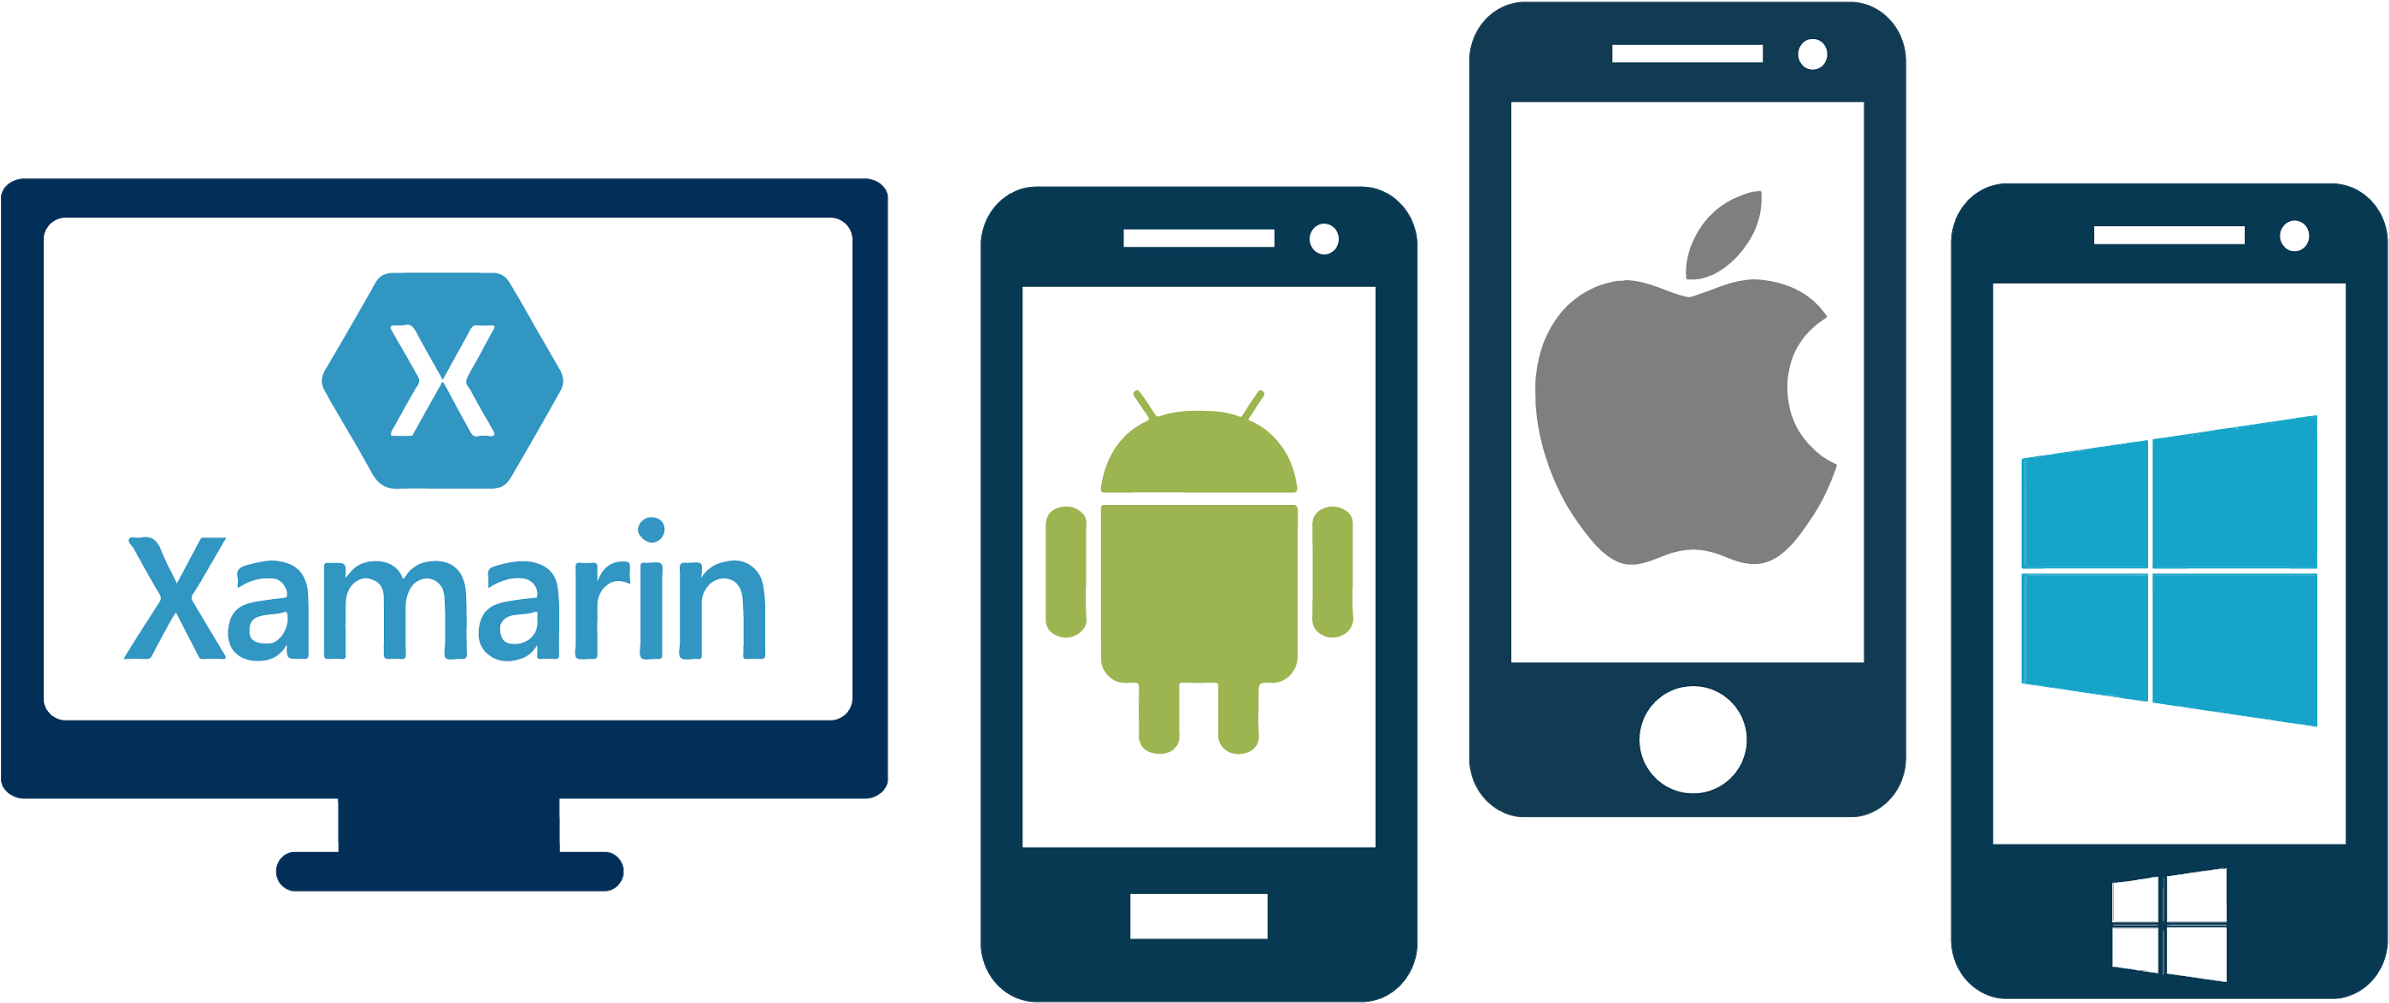 Application Development Technologies - Android (2500x1225)